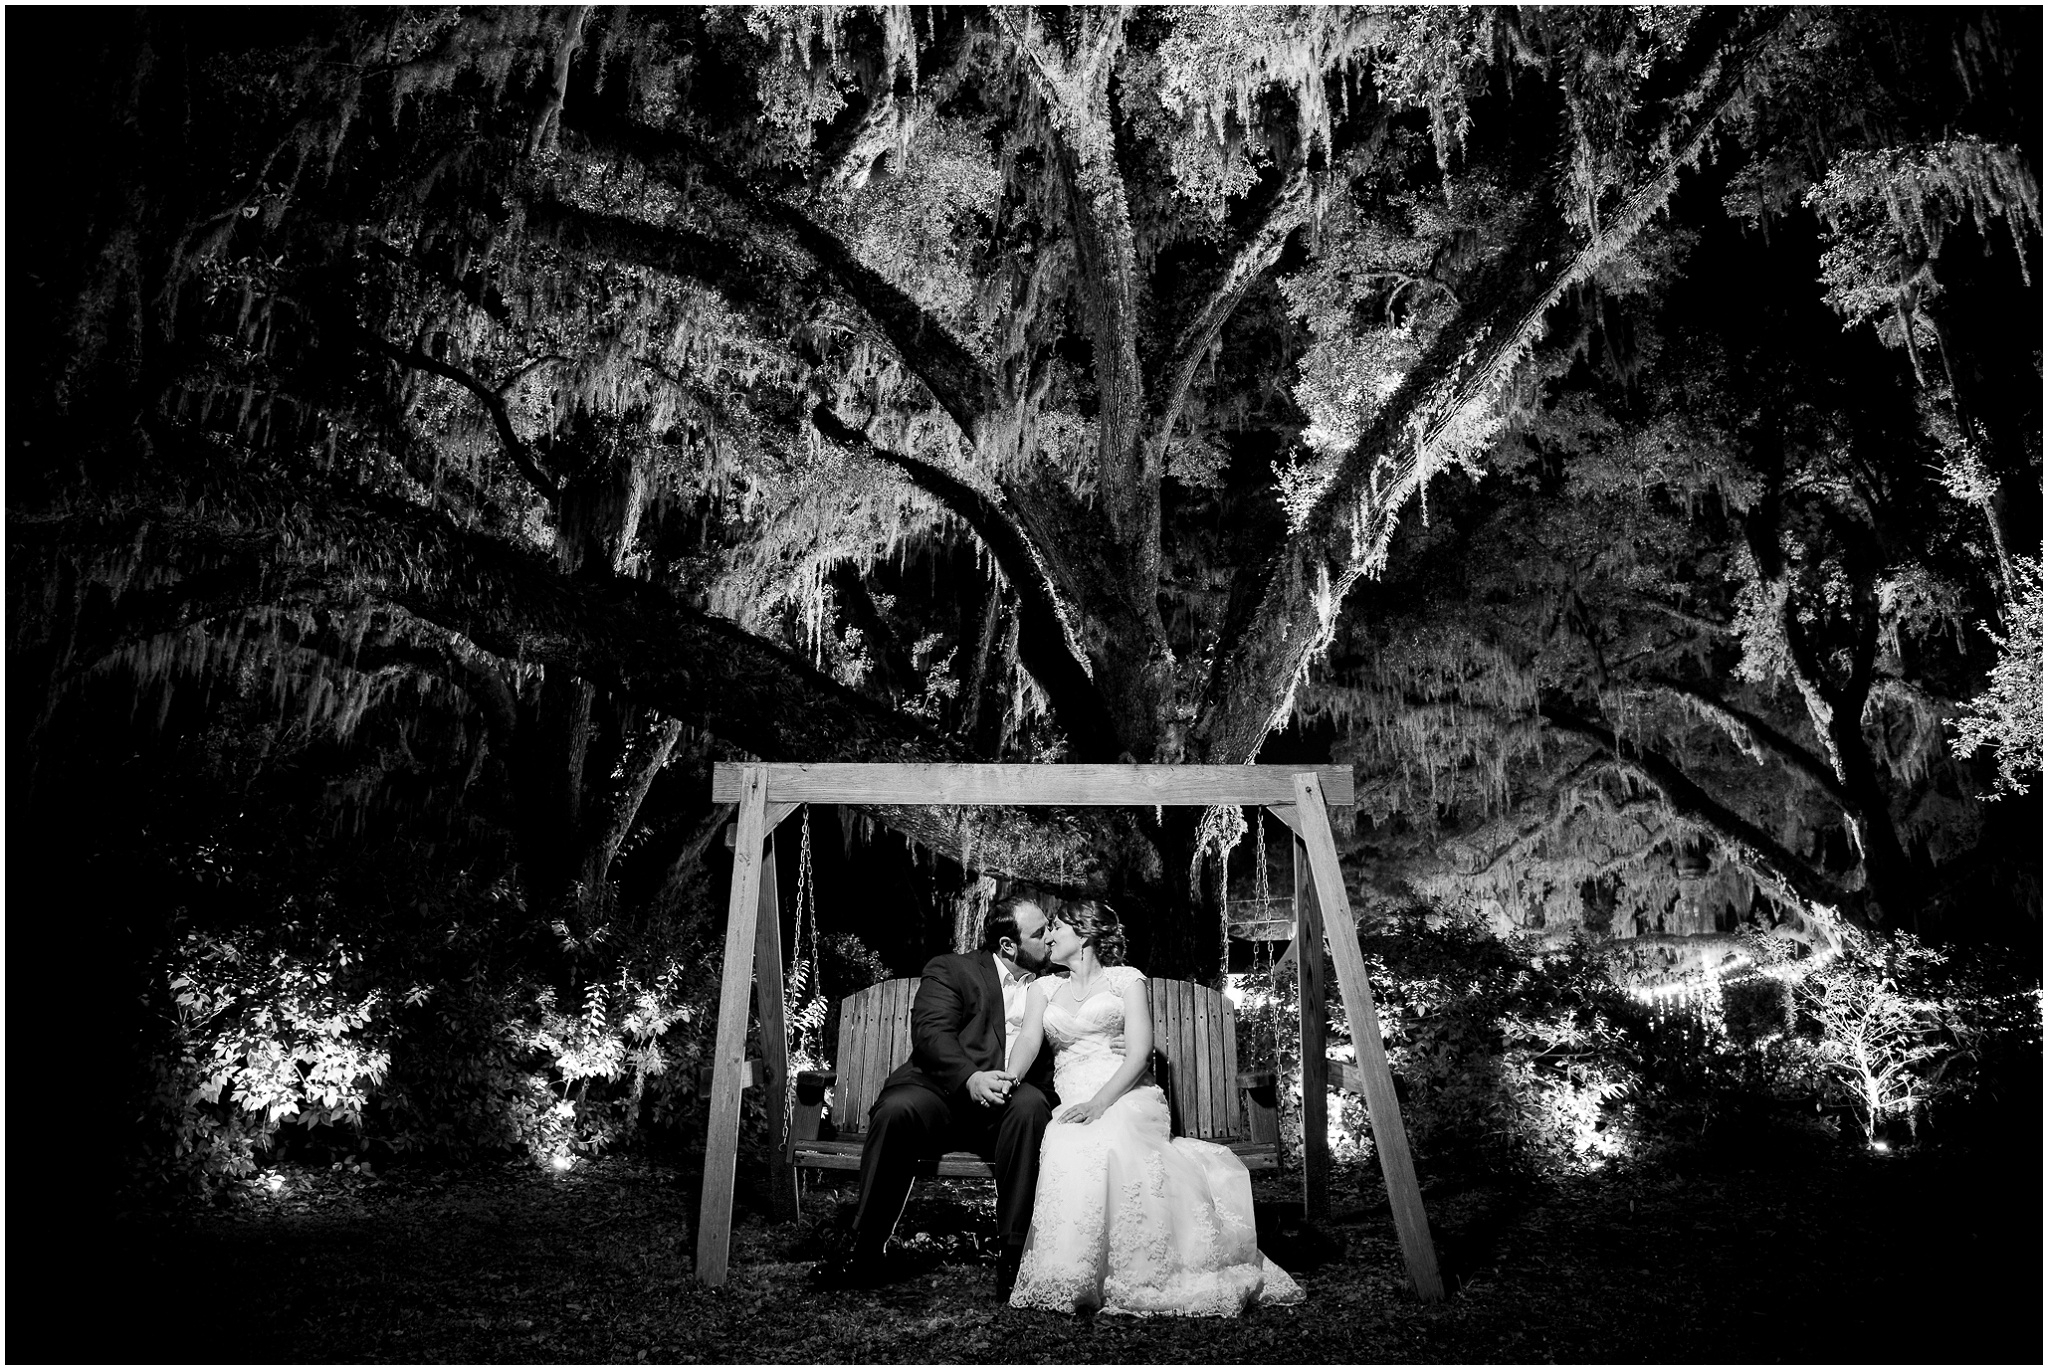 Paige and Dorsey lit up in the dark on the wing under the giant willow in Black and White, Upper Mill Plantation Wedding Session 33, Conway, South Carolina, Wedding coordinator, flowers and Cake - Willow Event Designs, Venue - Upper Mill Plantation, DJ - Carolina Entertainment, Dress - Foxy Lady, www.onelifephoto.net Photography